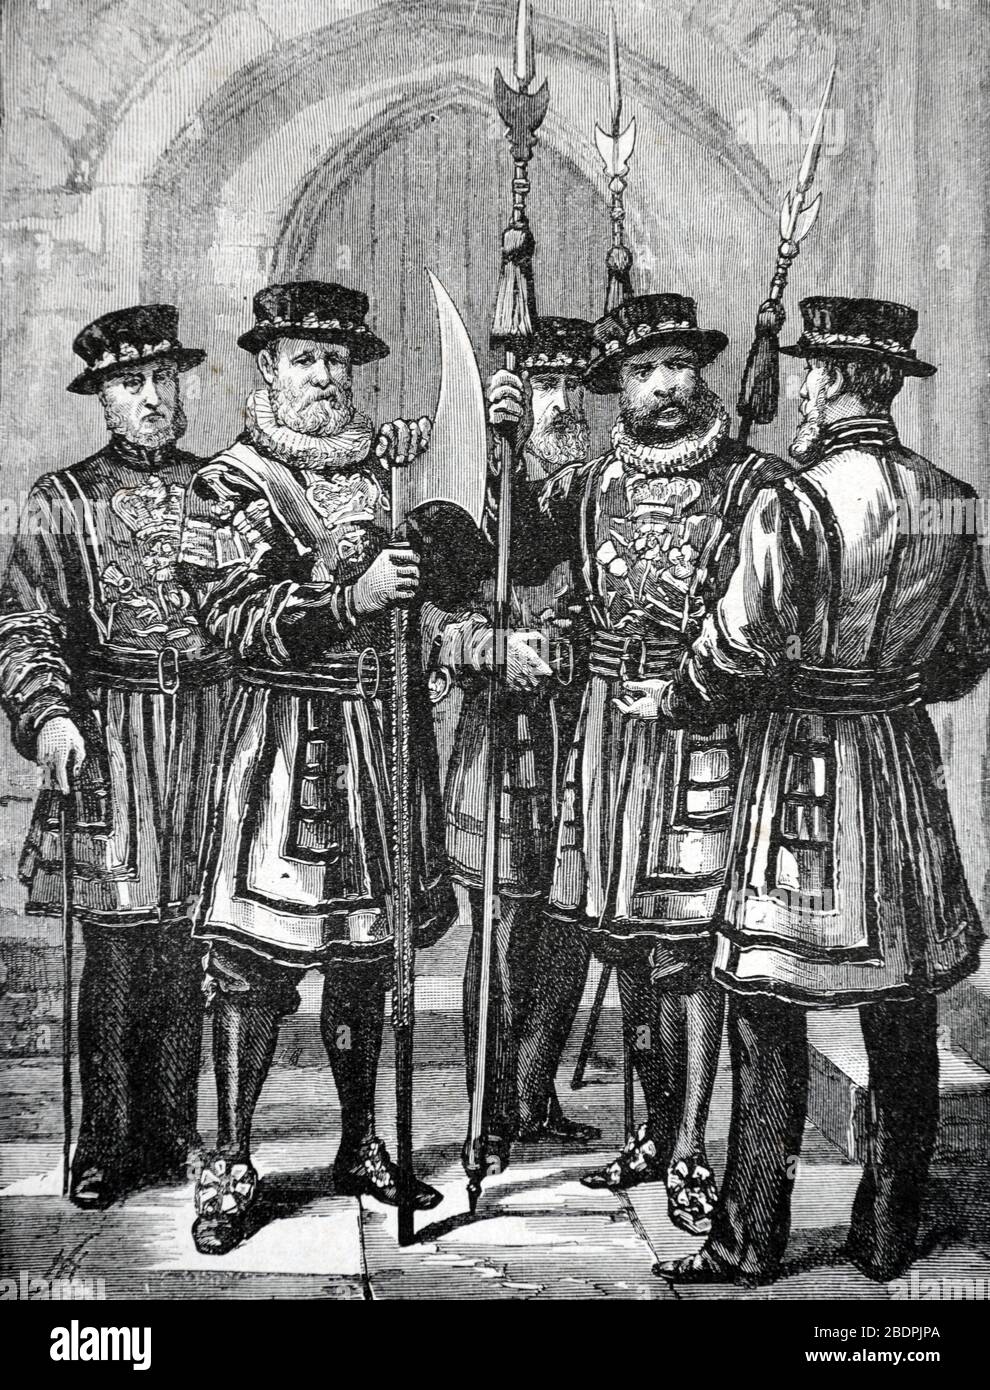 Yeoman Warders or Ceremonial Guards known as Beefeaters Tower of London England. Vintage or Old Illustration of Engraving 1886 Stock Photo